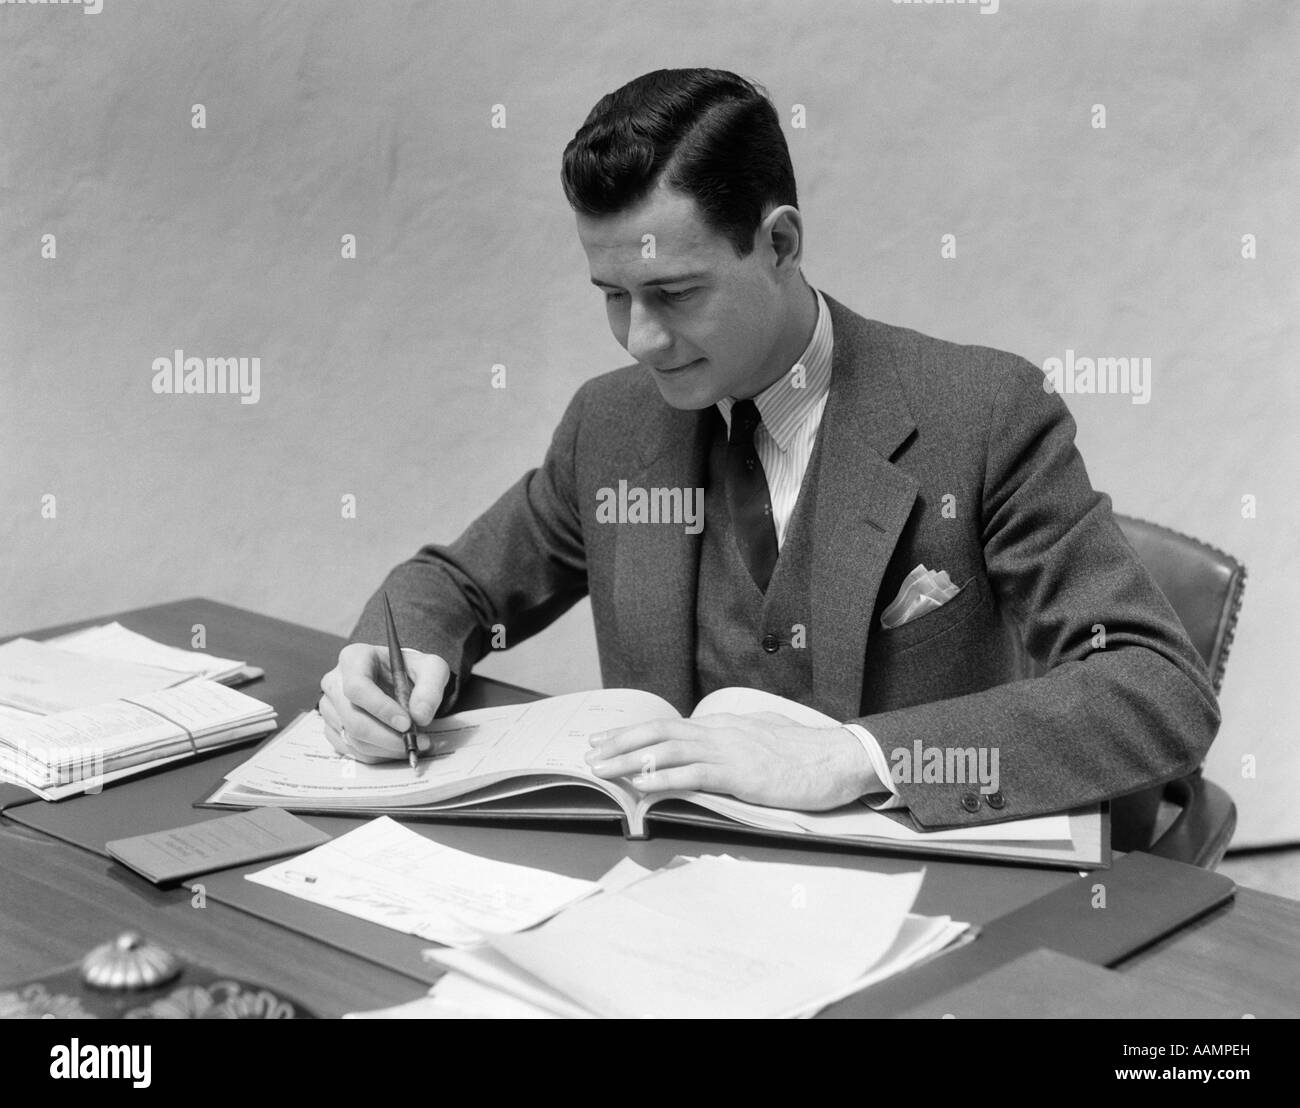 1930s Man At Desk In Office Writing Stock Photo 12664456 Alamy